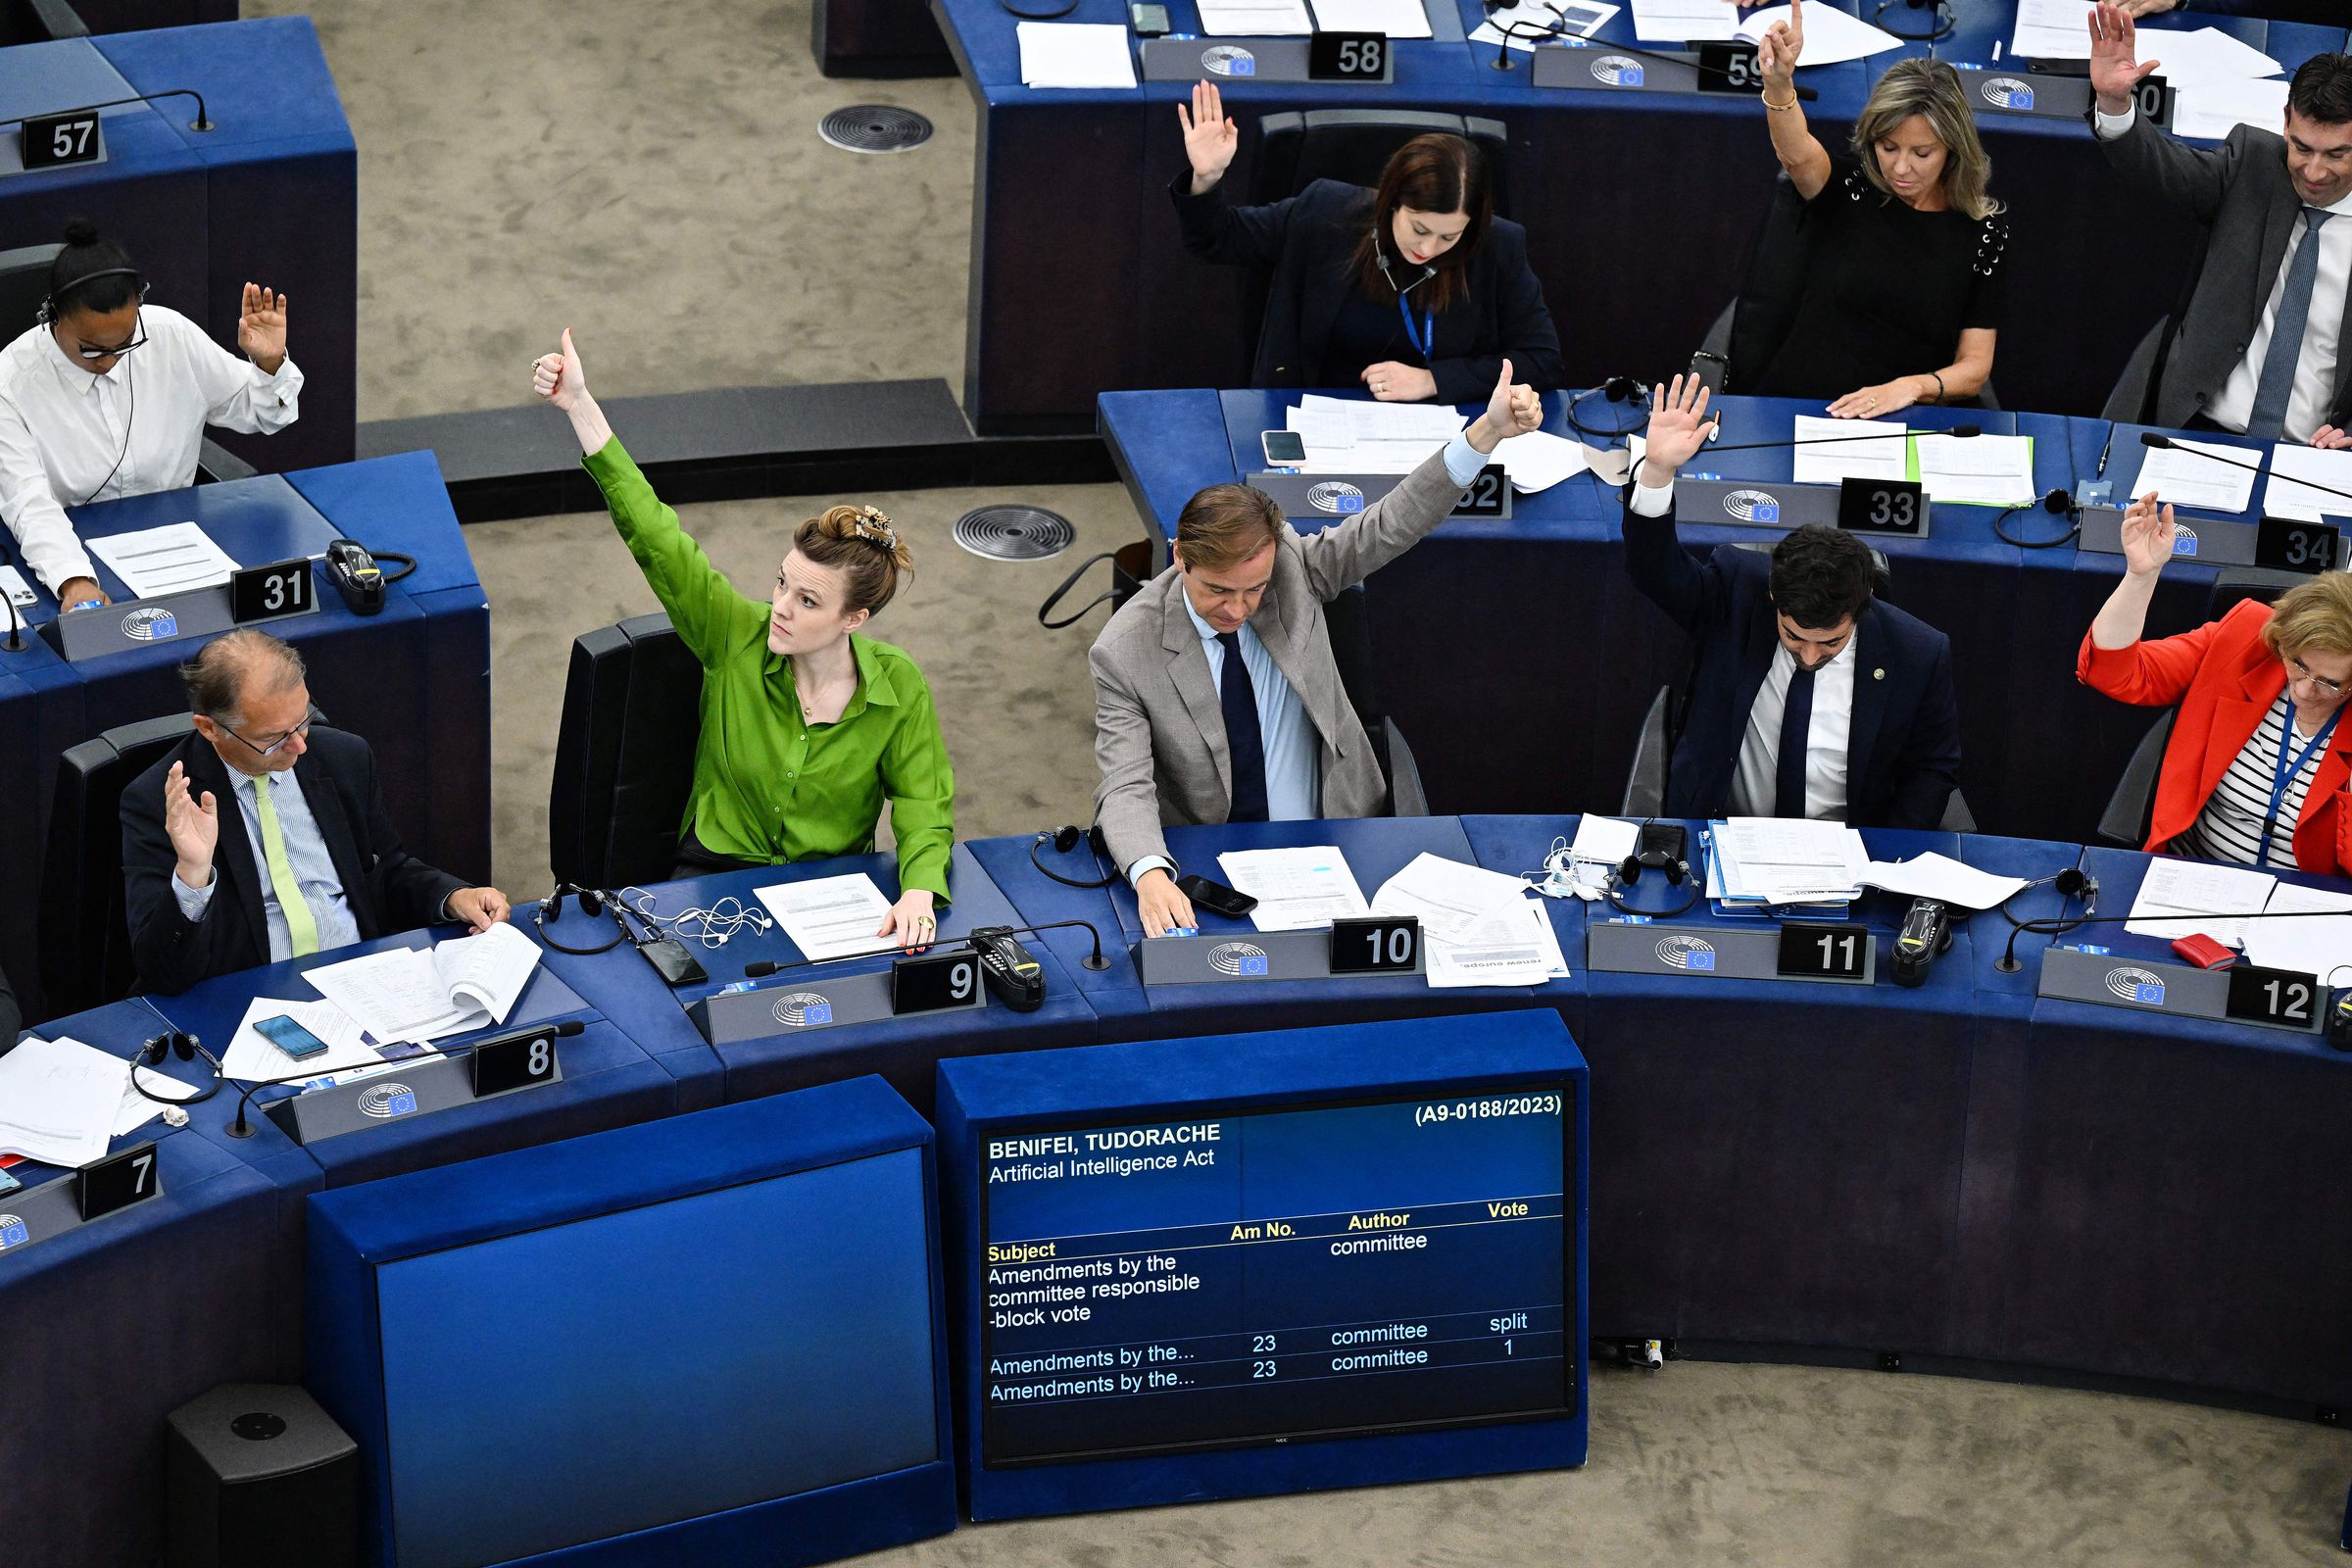 Members of the European Parliament take part in a voting session about Artificial Intelligence Act during a plenary session at the European Parliament in Strasbourg, eastern France, on June 14, 2023